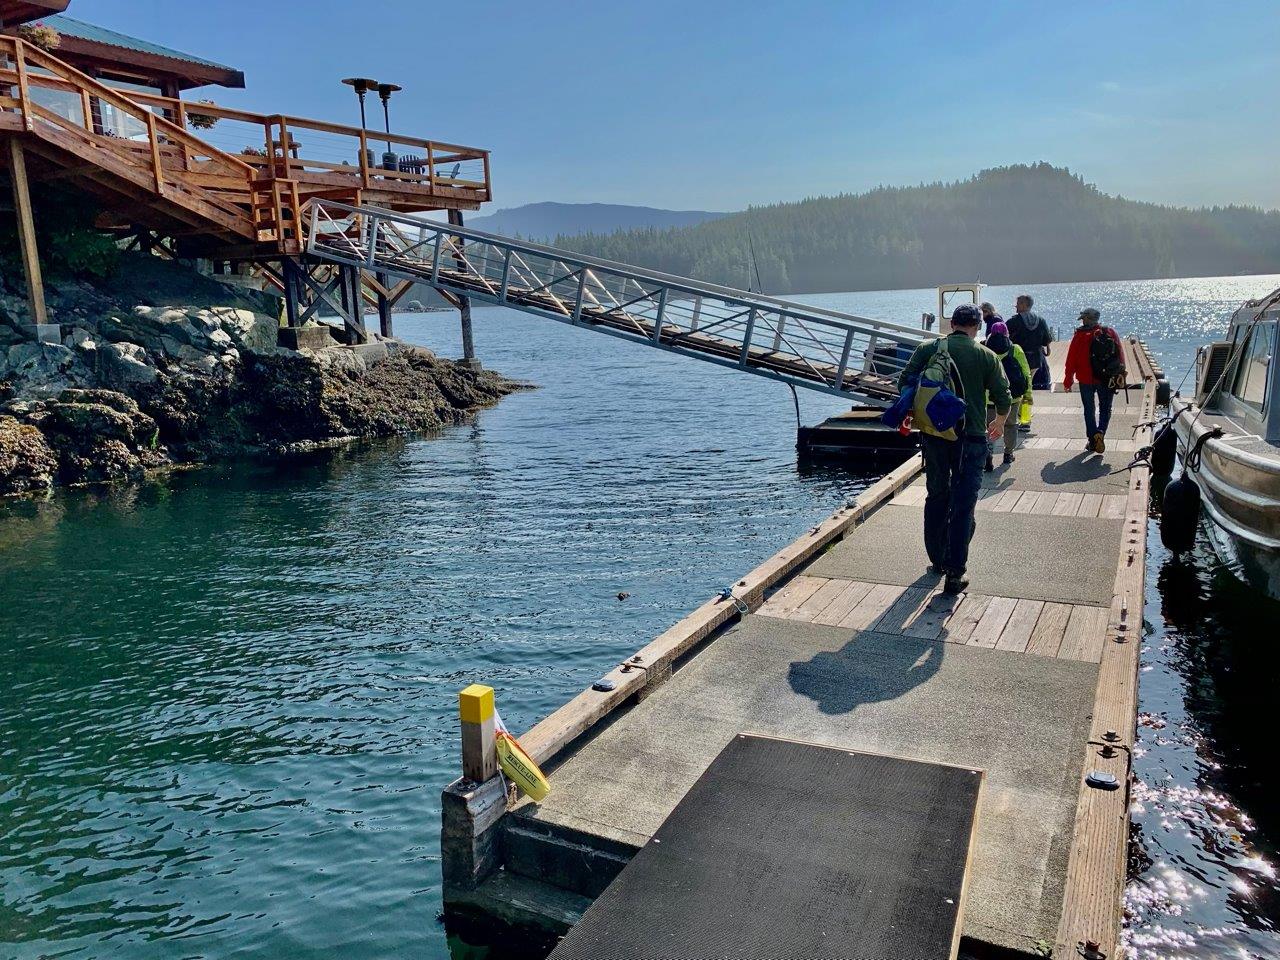 Dock leading up to the lodge - Photo Carol Patterson